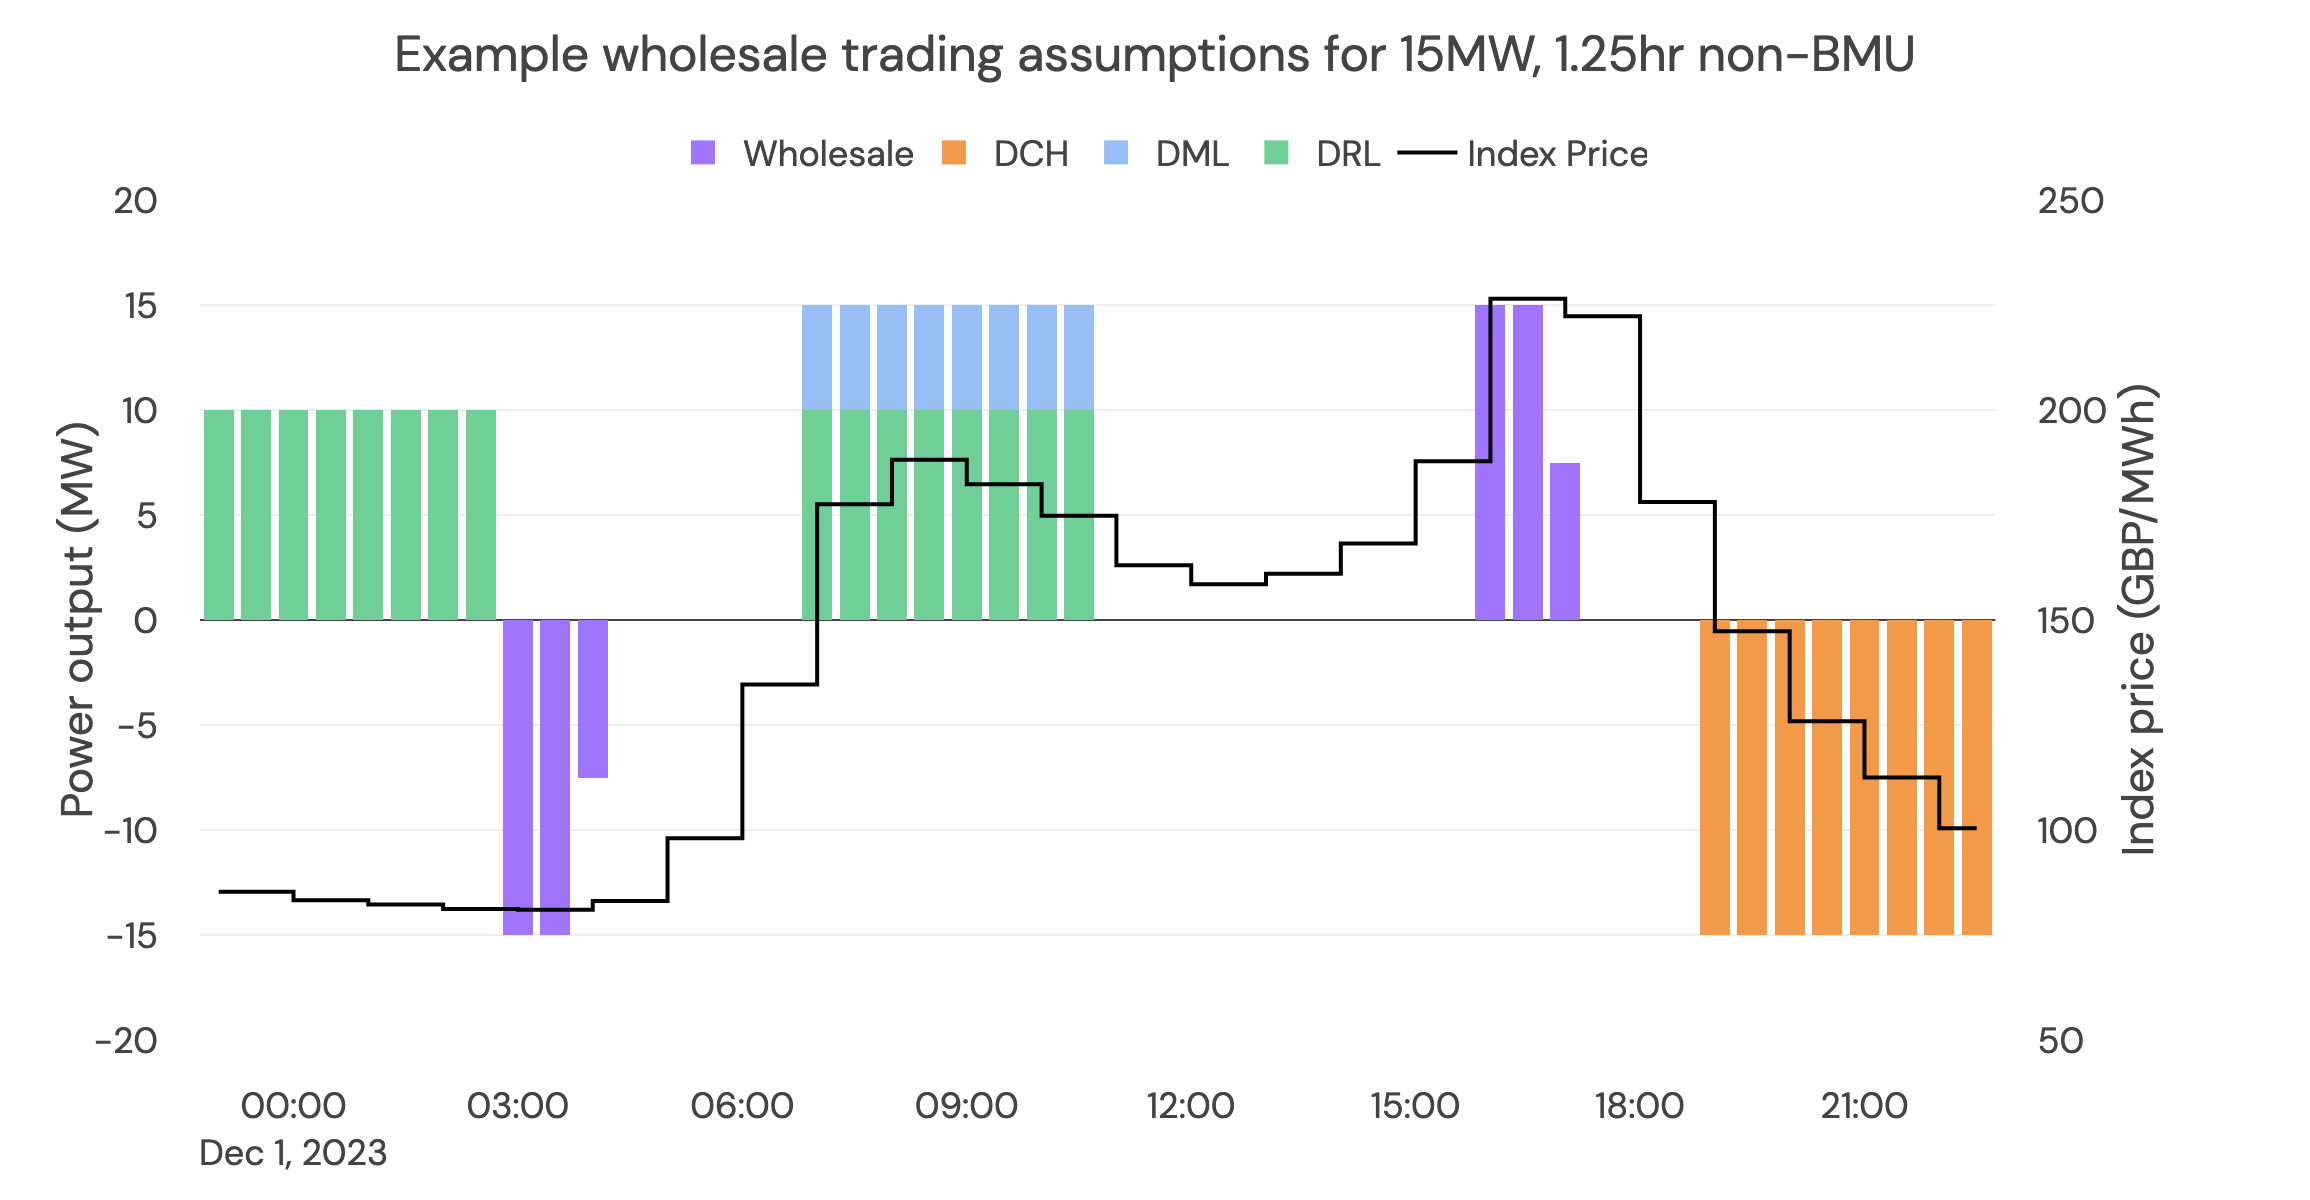 Example of how wholesale revenues activity would be assigned to a non-BMU. In this example, the asset is contracted into frequency response services in EFA blocks 1, 3, and 6. It is therefore assumed that the asset is only available for wholesale trading in EFA blocks 2, 4, and 5. As the highest spreads are over 50 GBP/MWh the asset charges at full power in EFA 2 and discharges in EFA 5. It is assumed the asset completes one full cycle in the wholesale trade.